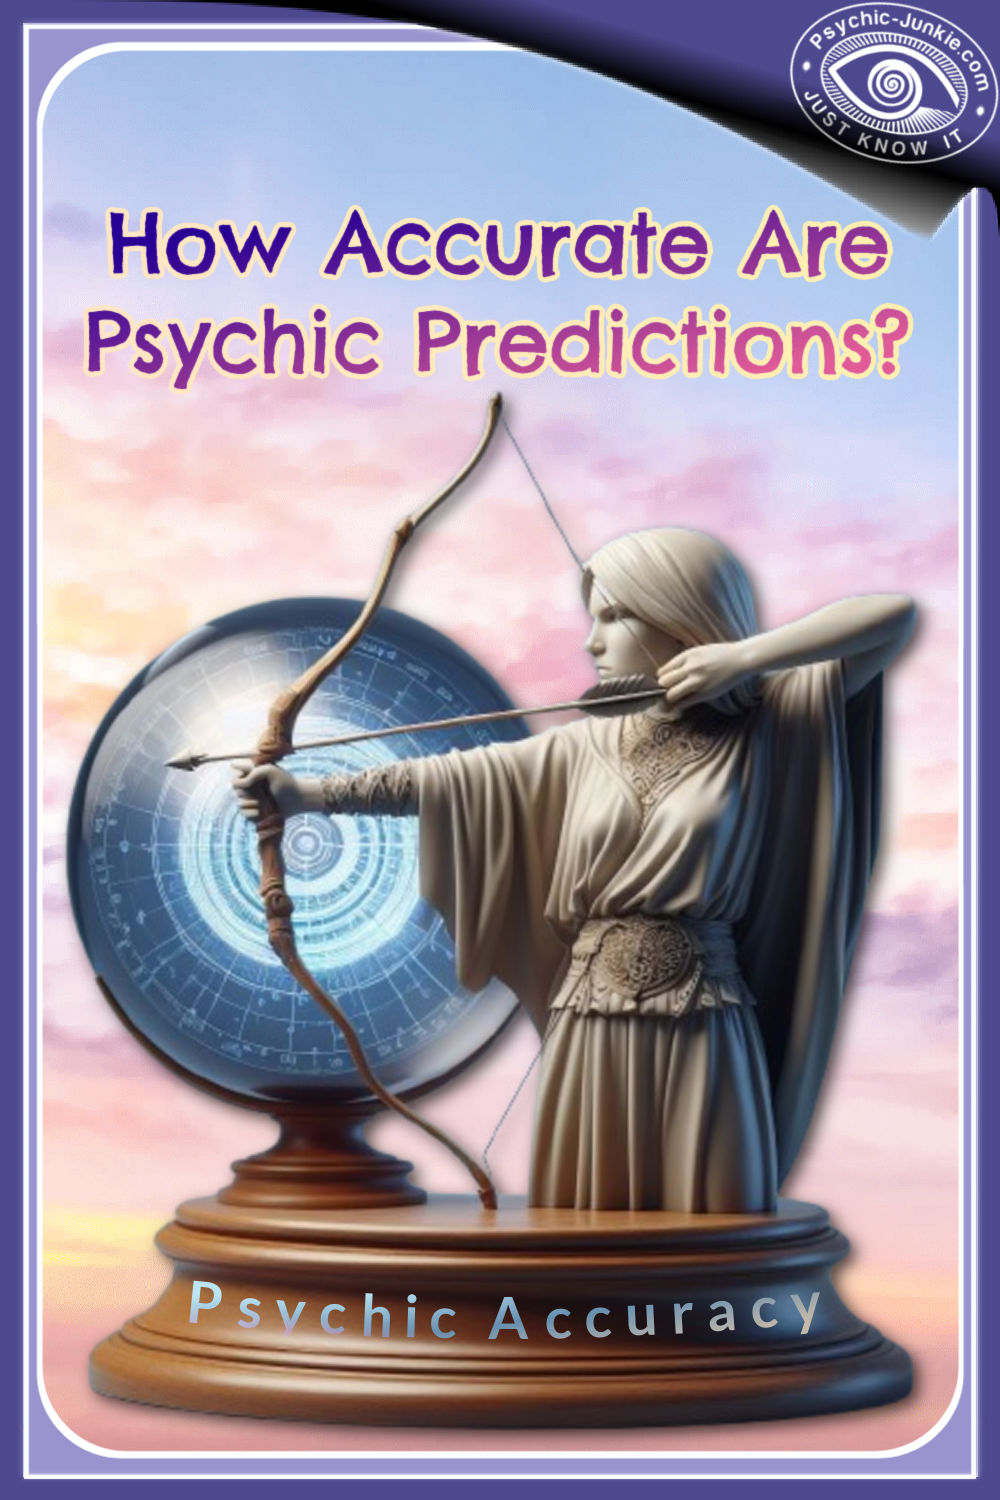 How Accurate Are Psychic Predictions?